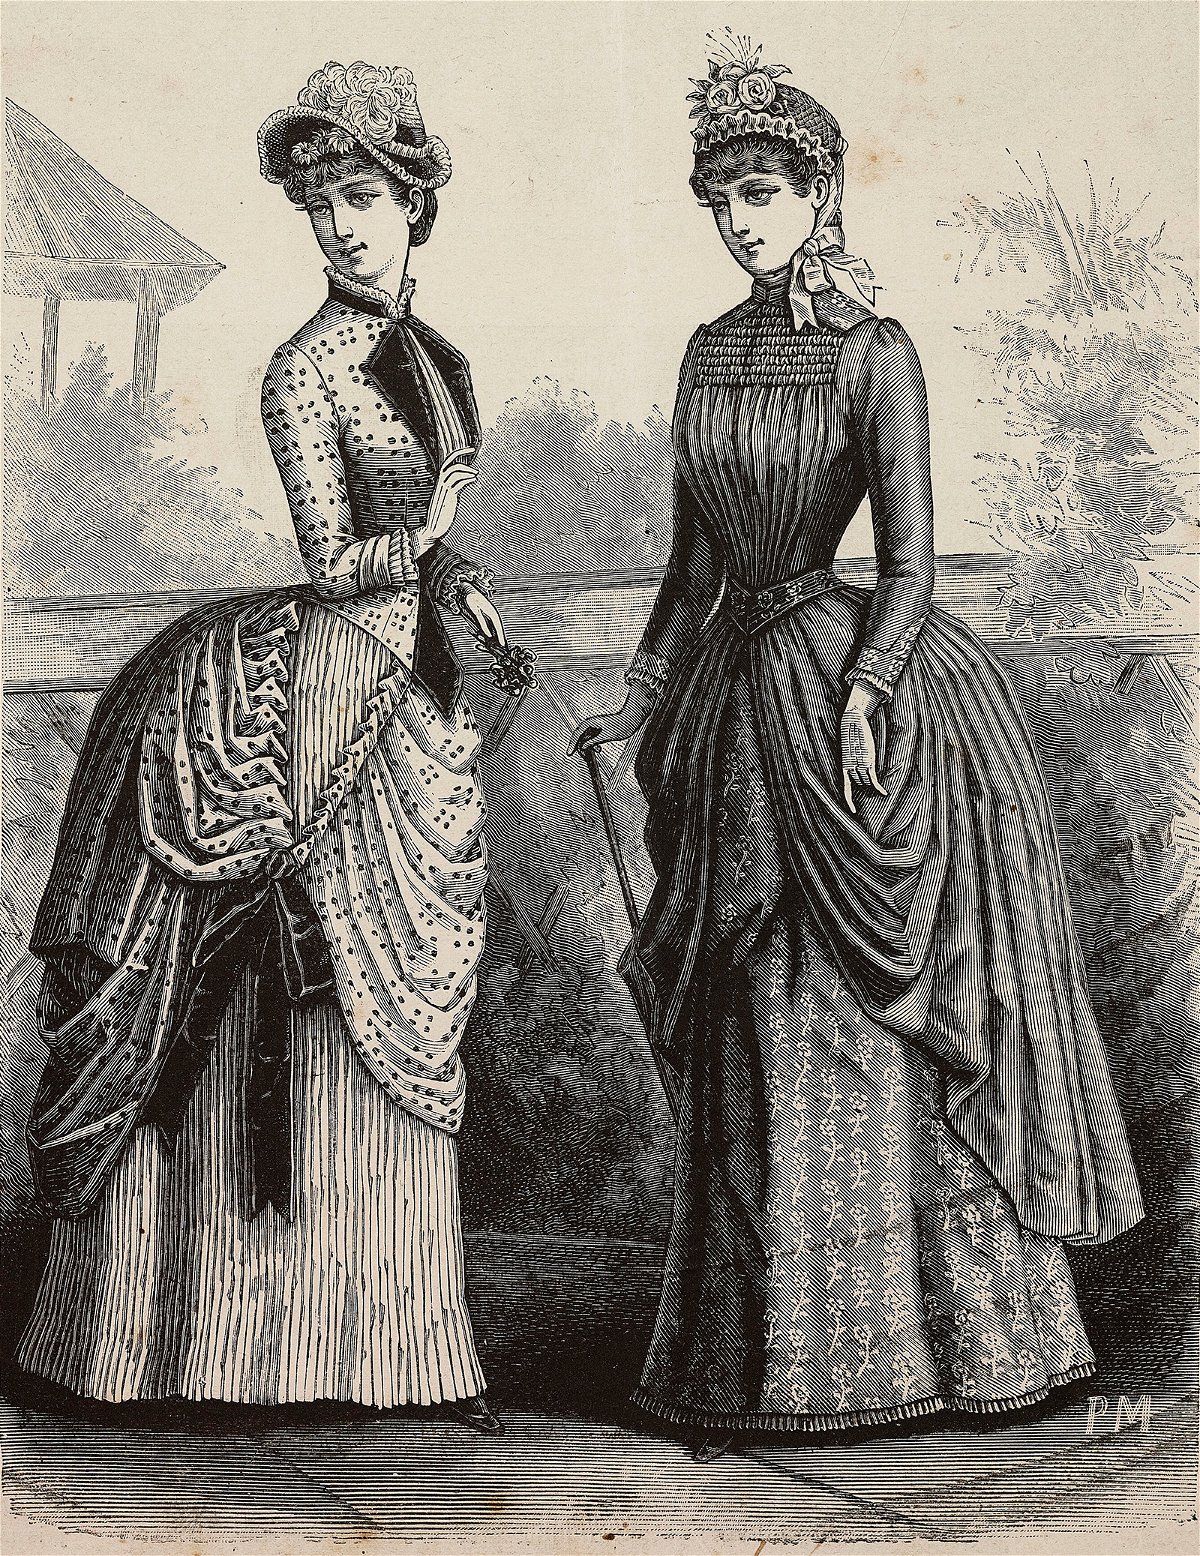 <i>De Agostini Editorial/Getty Images</i><br/>Journalist Heather Radke highlights the bustle garment popular in the 19th century.